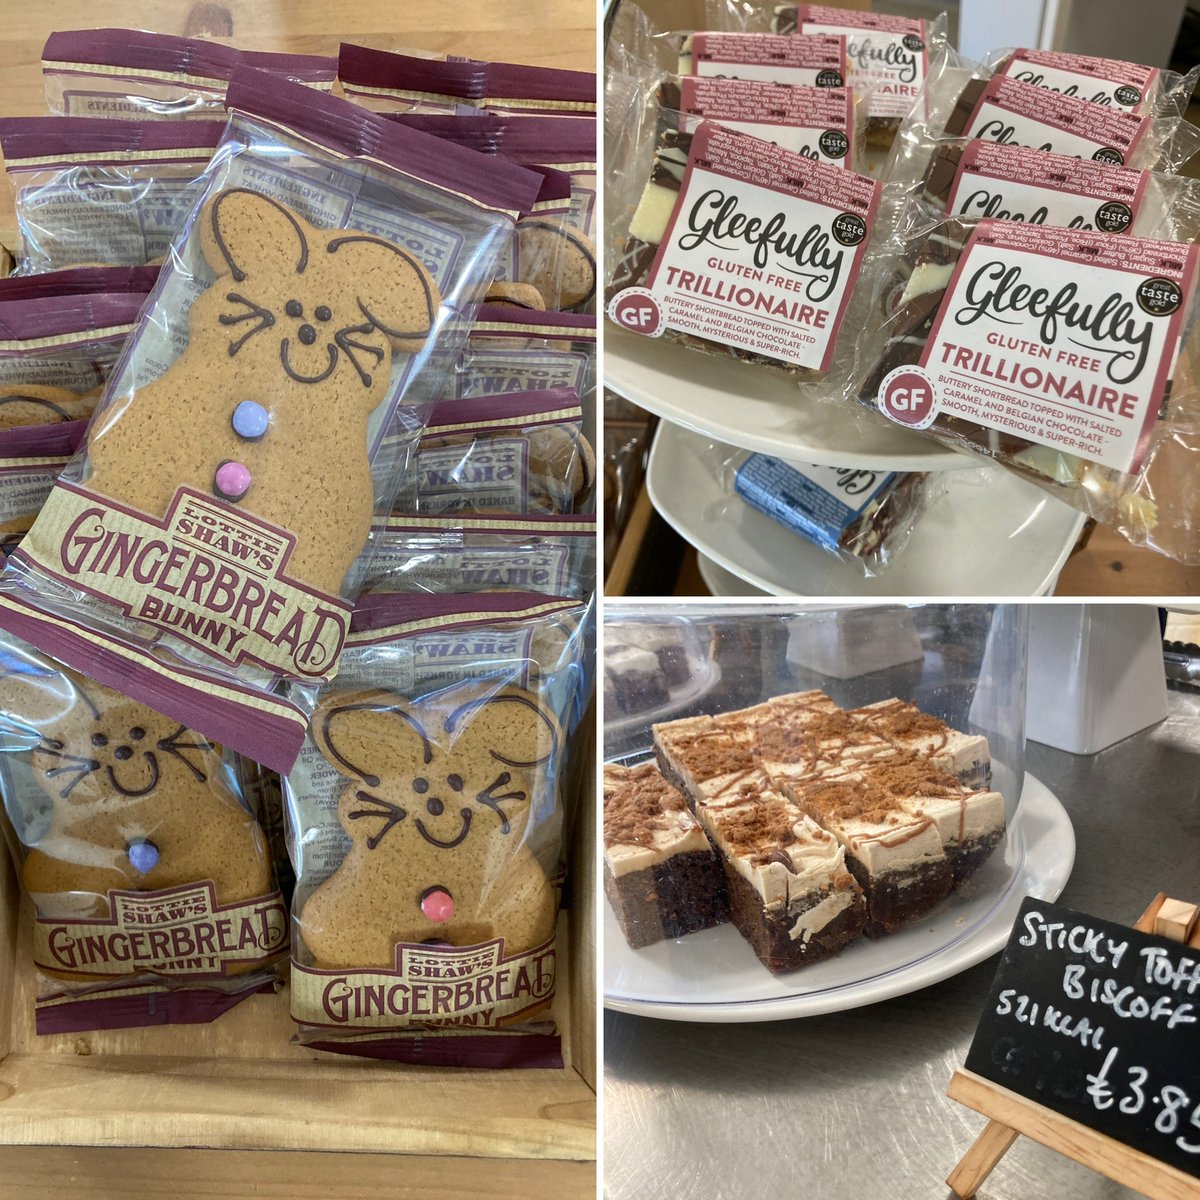 Treat yourself at our Water’s Edge Café this holiday! Try a Gingerbread bunny, made in Yorkshire. Our lovely Biscoff cake is vegetarian and these Trillionaire treats are Gluten Free.